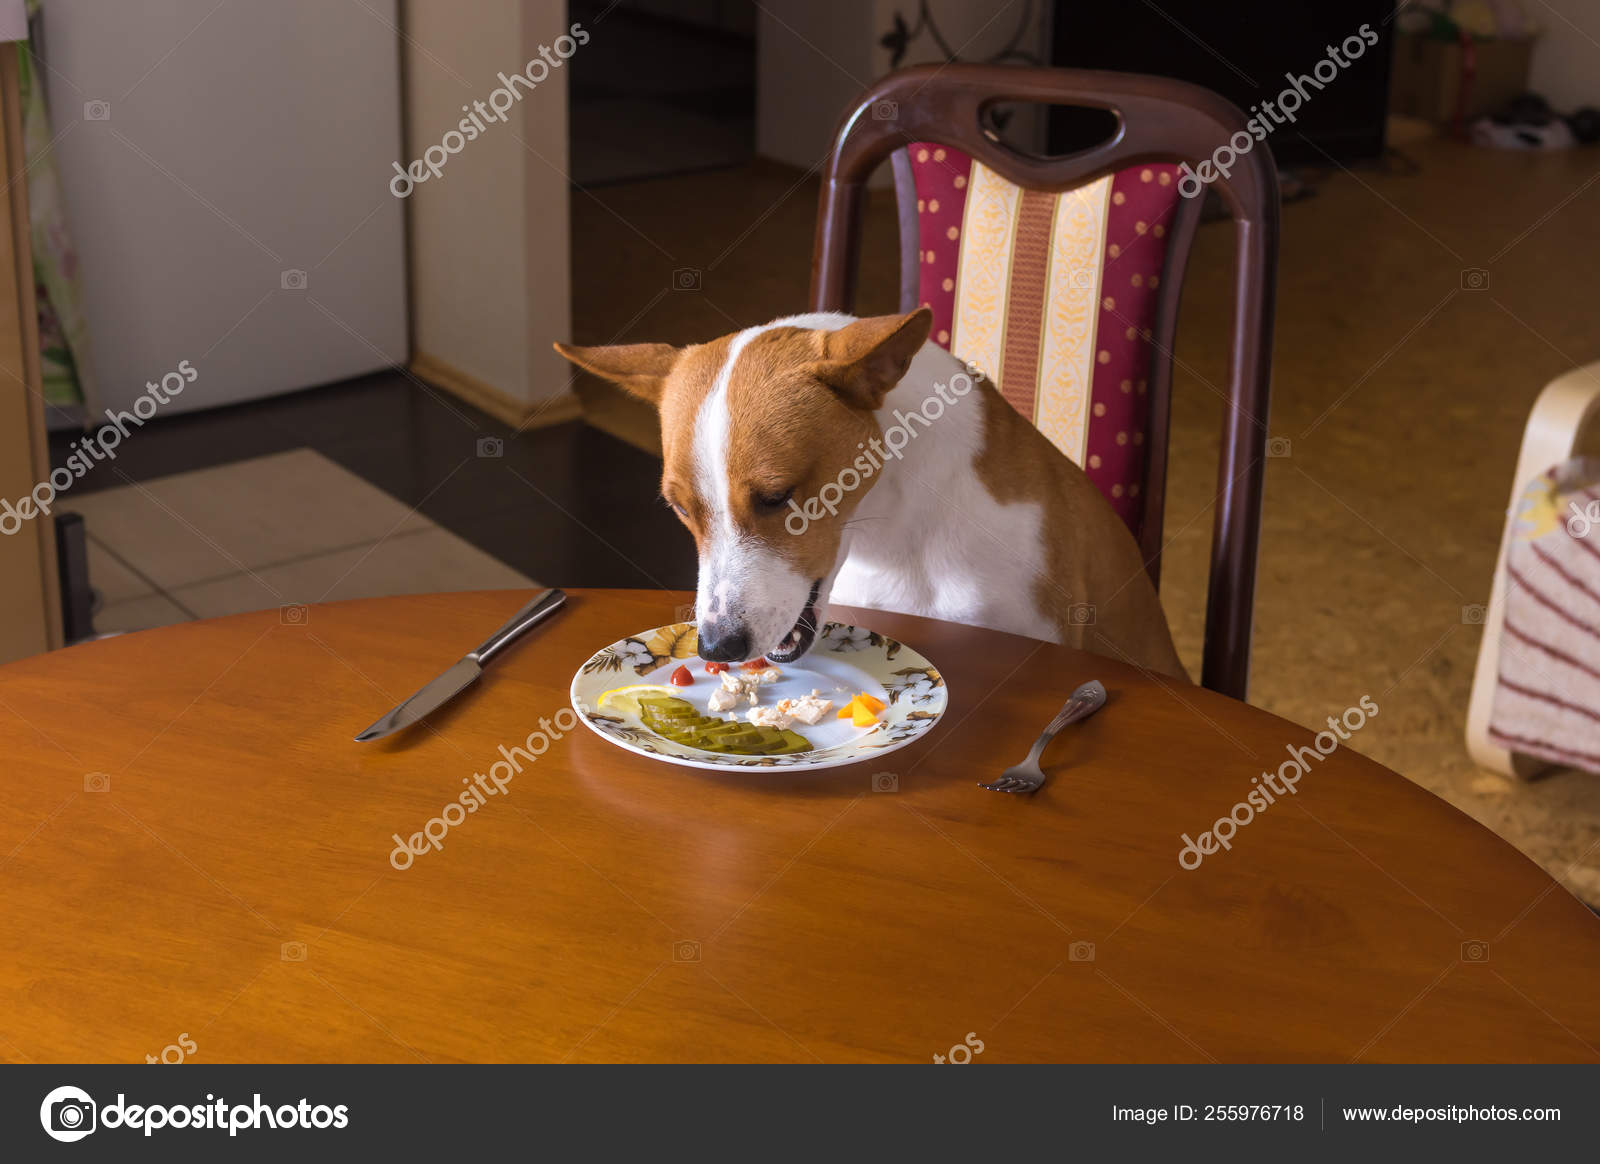 Single Basenji Having Lunch Sitting All Alone Dining Room Stock Photo by 255976718